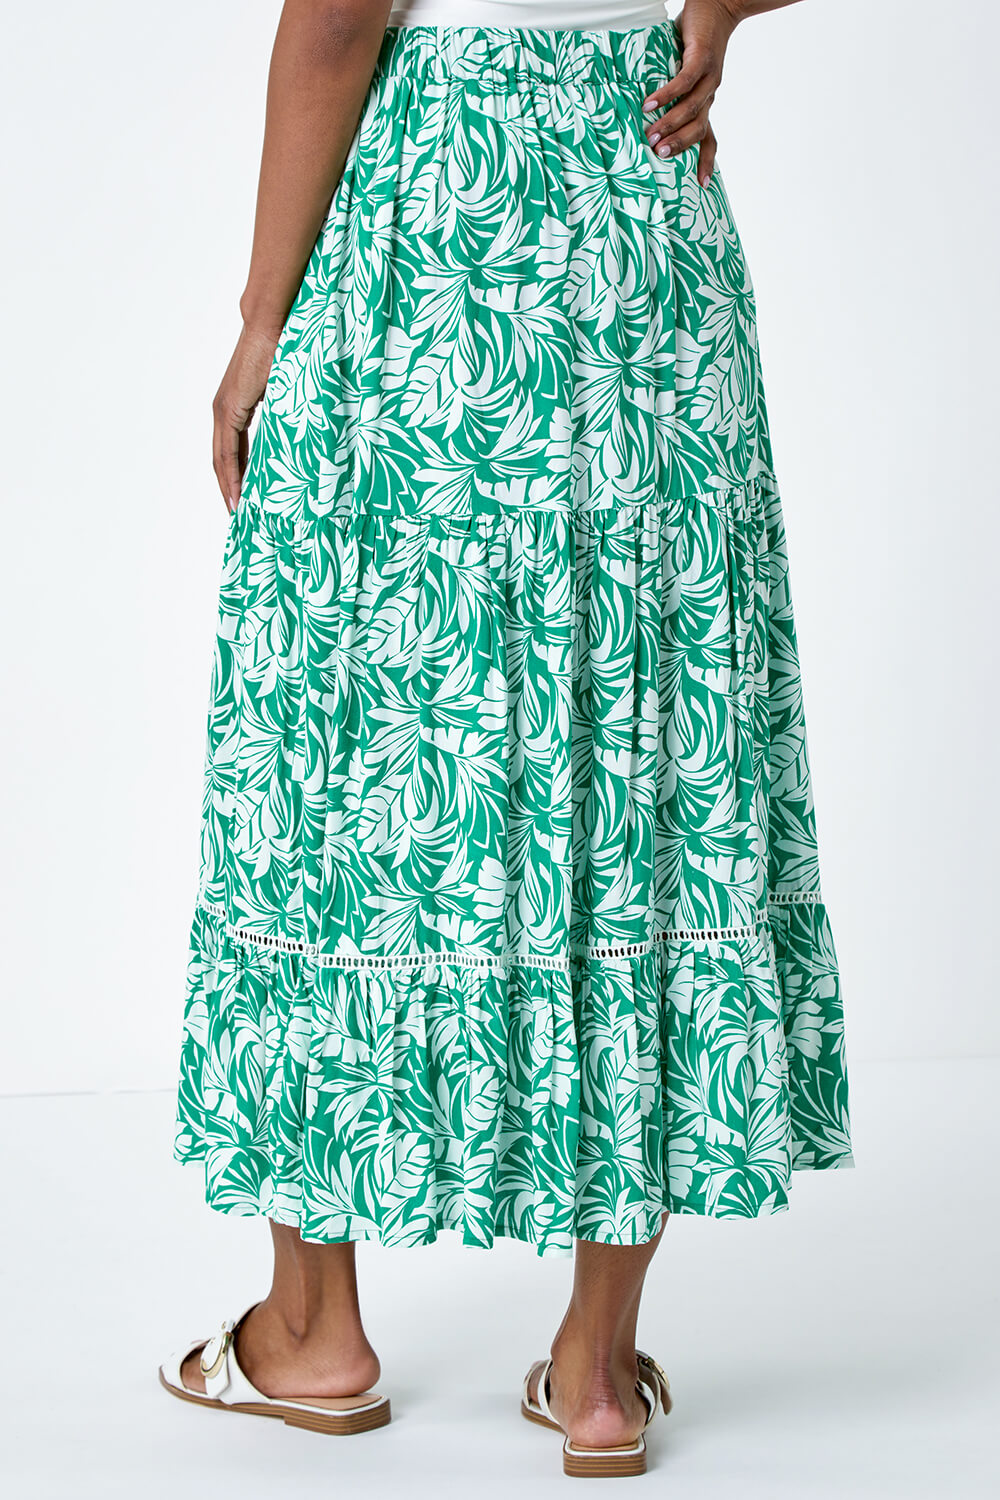 Green Floral Tassel Tie A Line Tiered Midi Skirt, Image 3 of 5